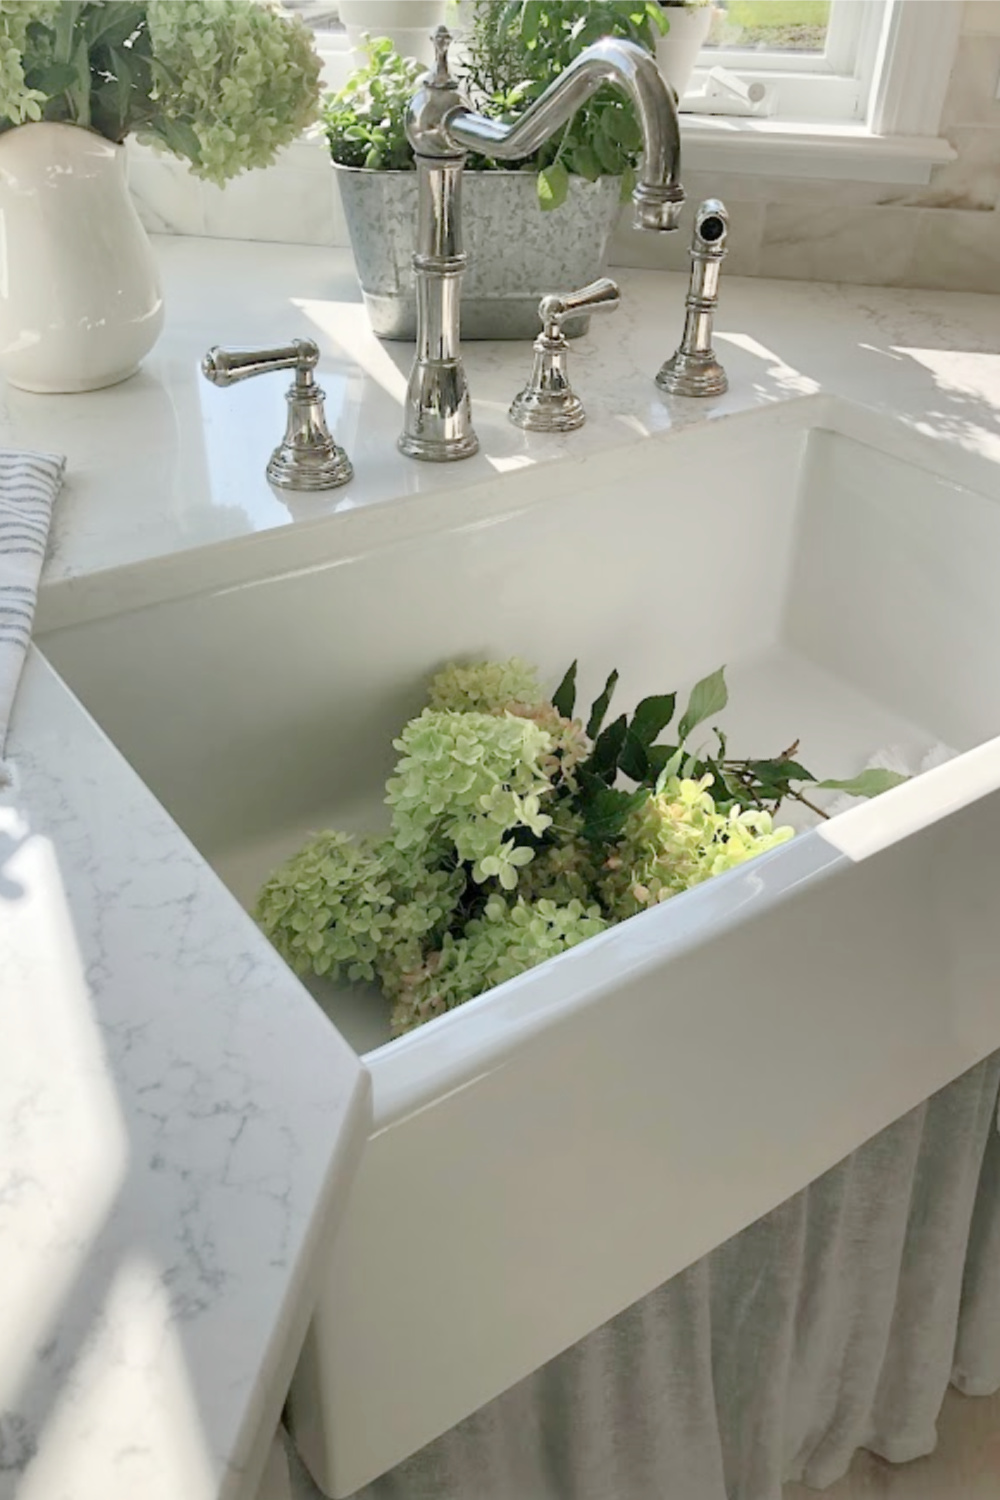 Hello Lovely's farm sink (Hyannis-30 from Nantucket Sinks) in renovated kitchen with Viatera Muse counters and Waterworks Julia faucet. #farmsinks #farmhousesink